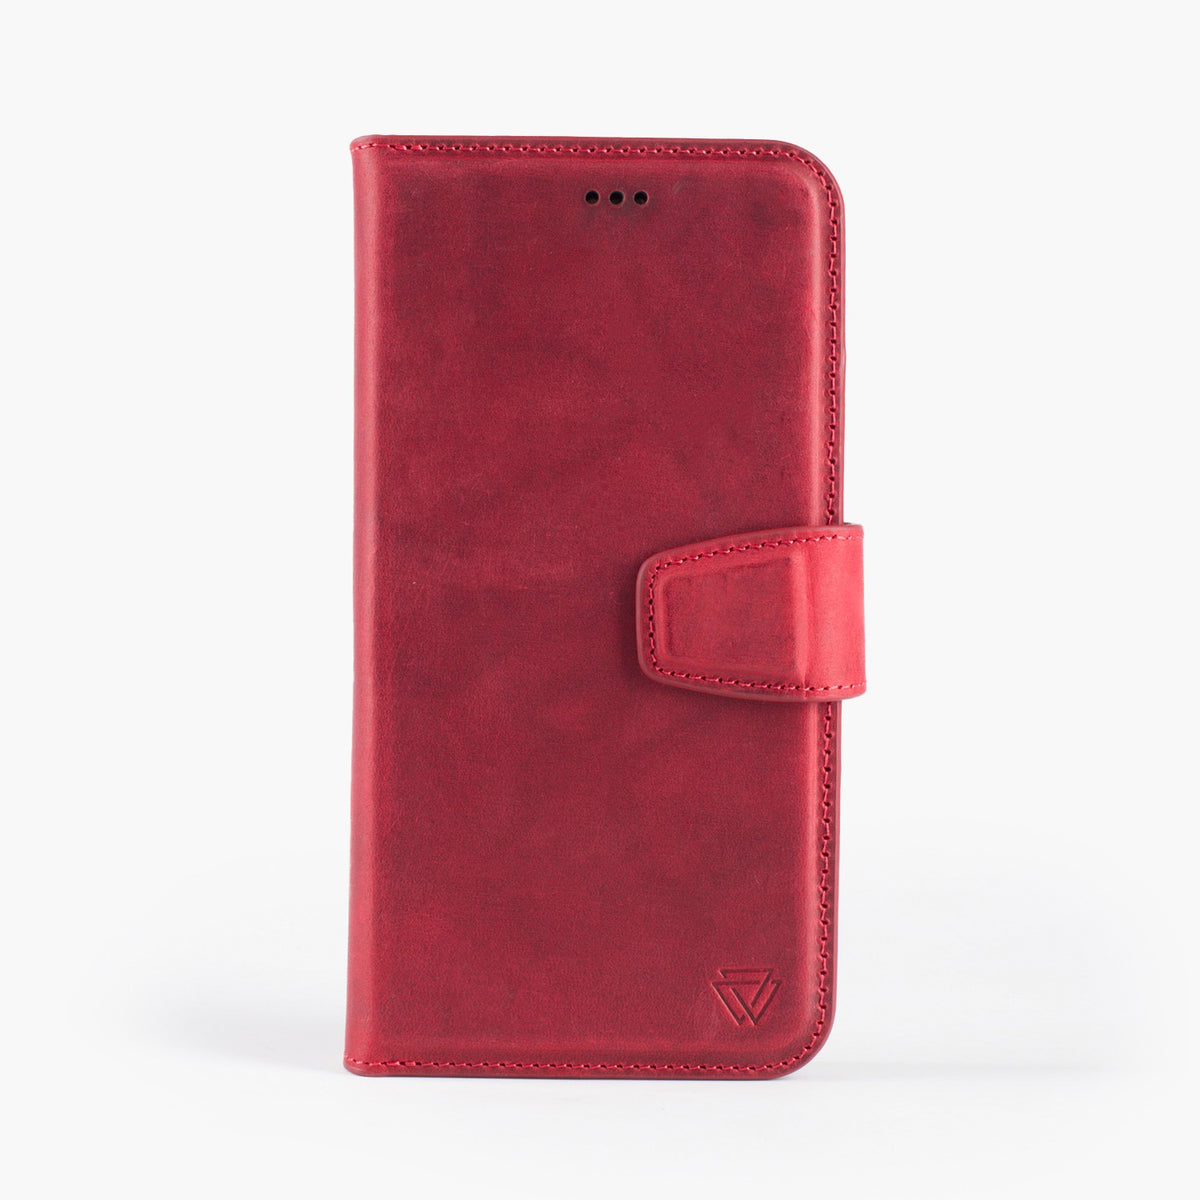 Wachikopa Genuine Leather Magic Book Case 2 in 1 for iPhone SE (2022 / 2020)/8/7 Red